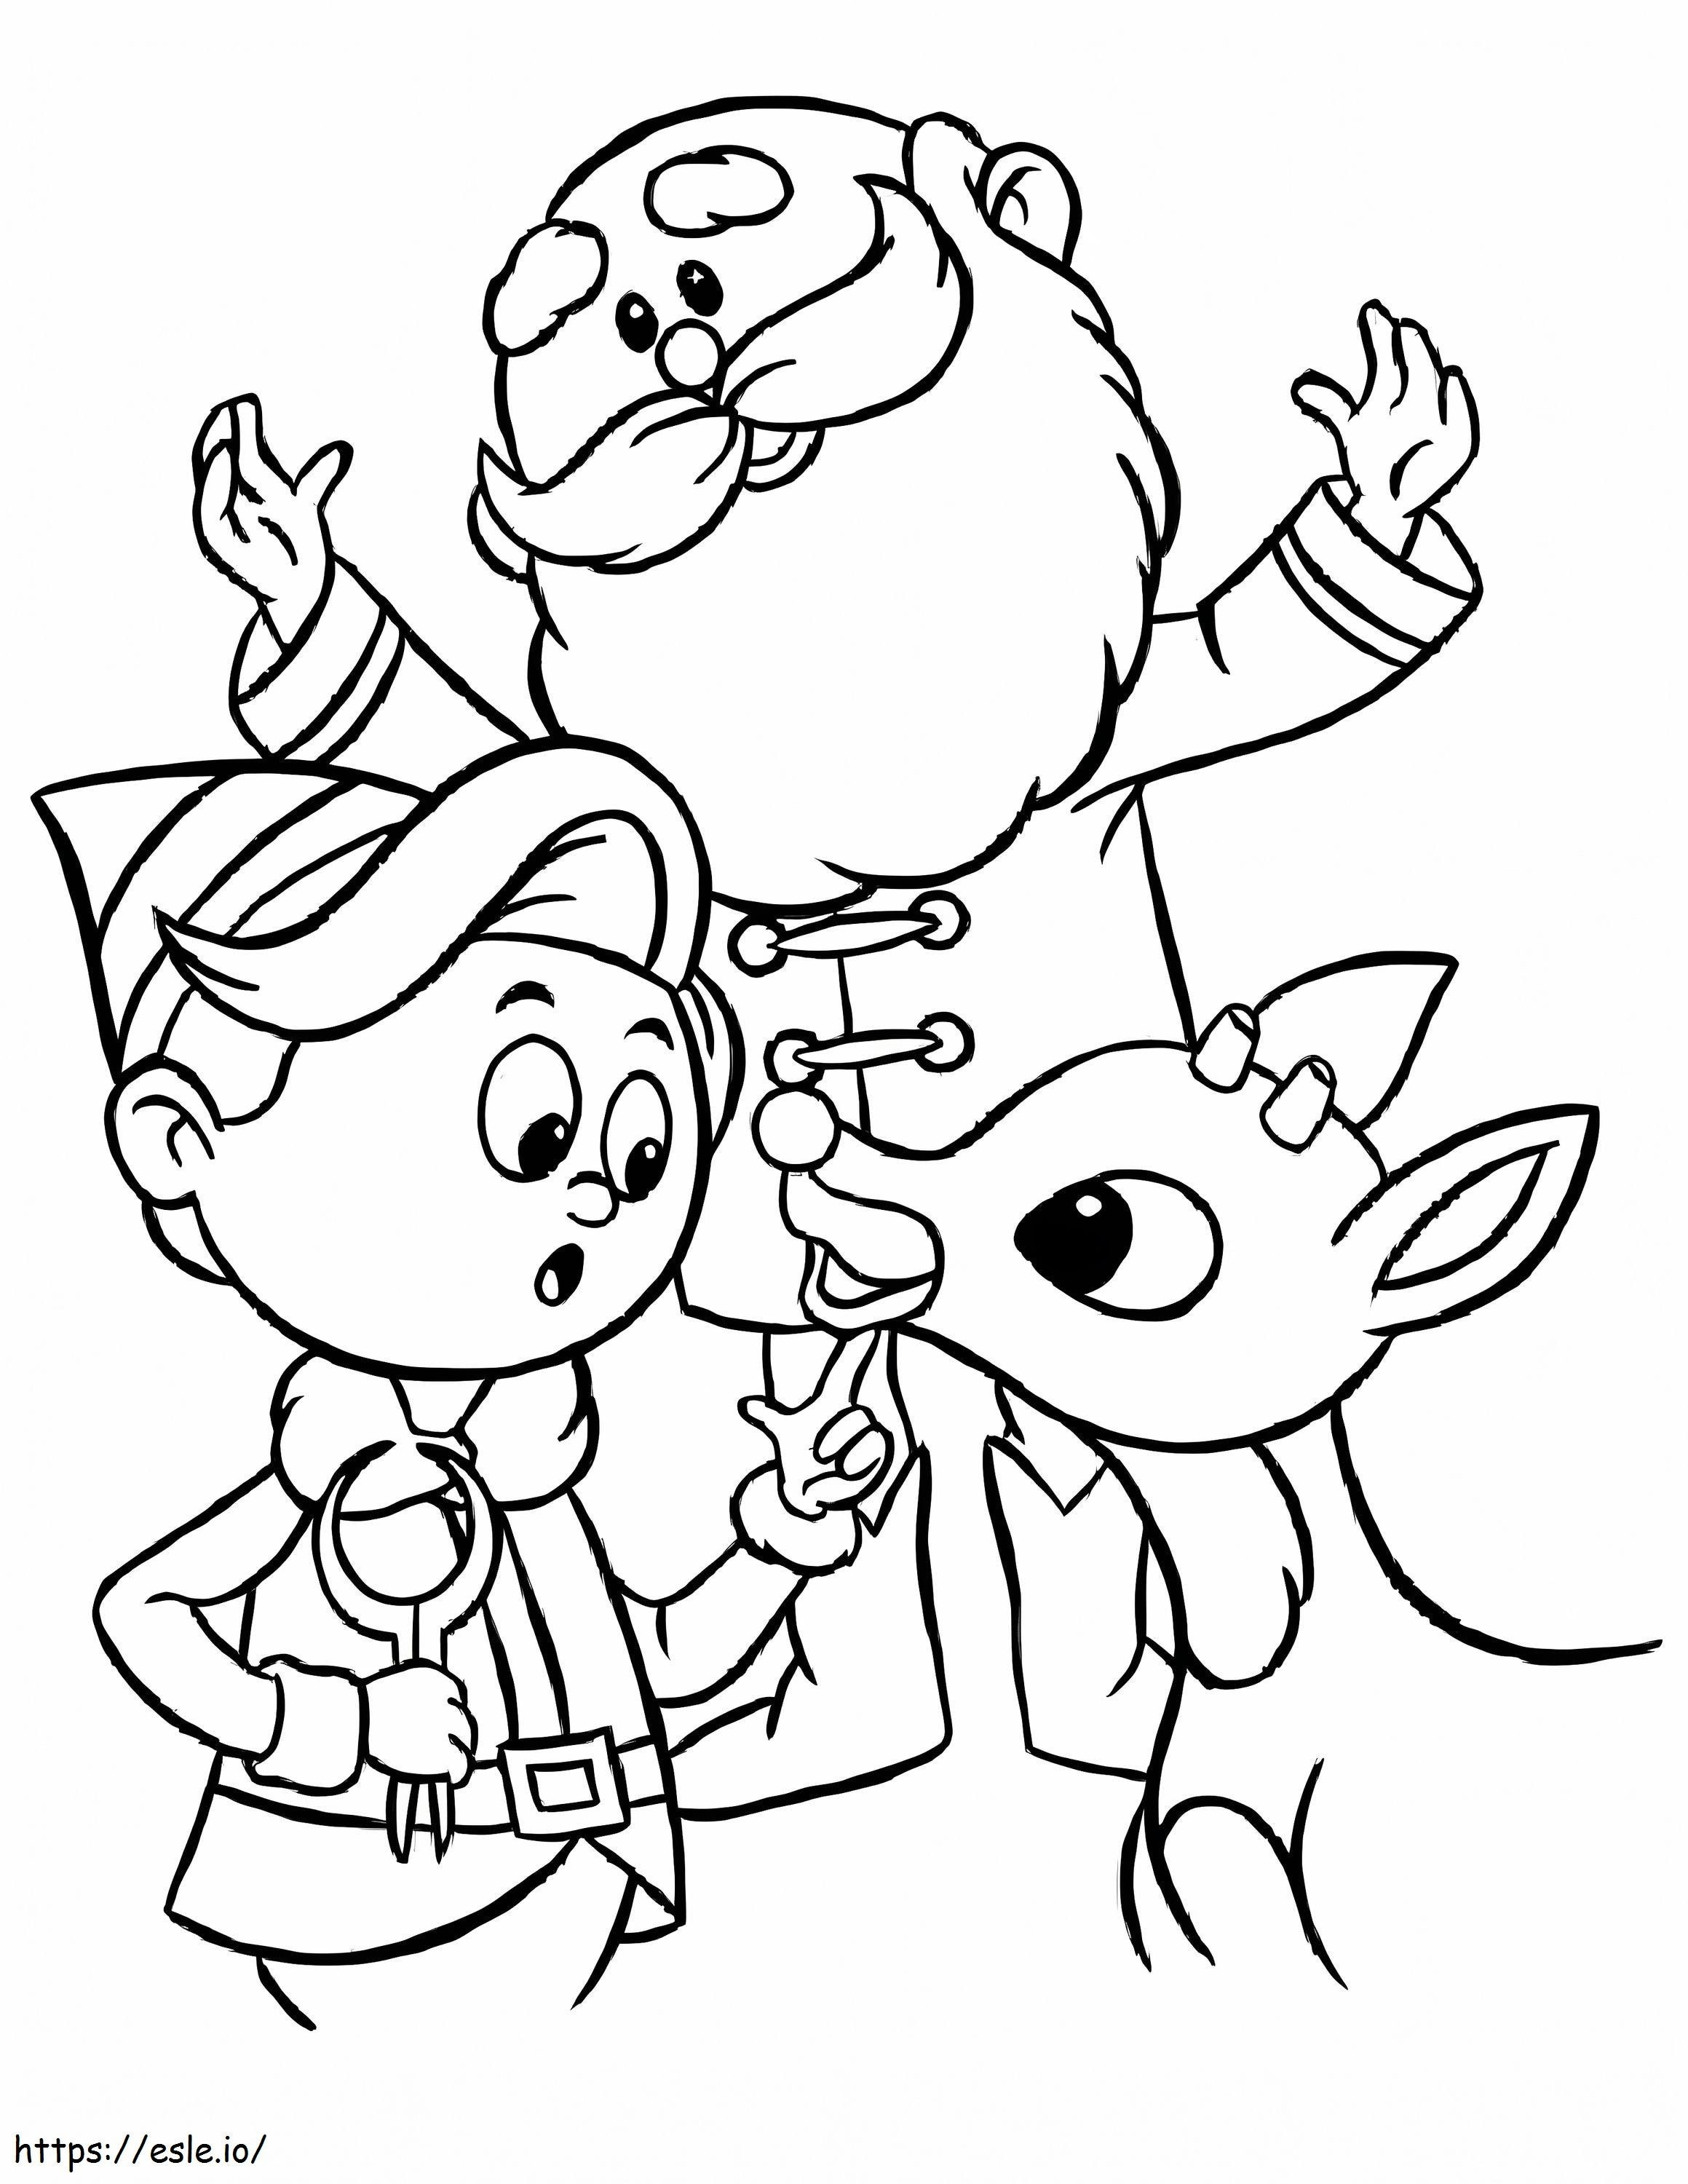 Rudolph And The Two Humans coloring page